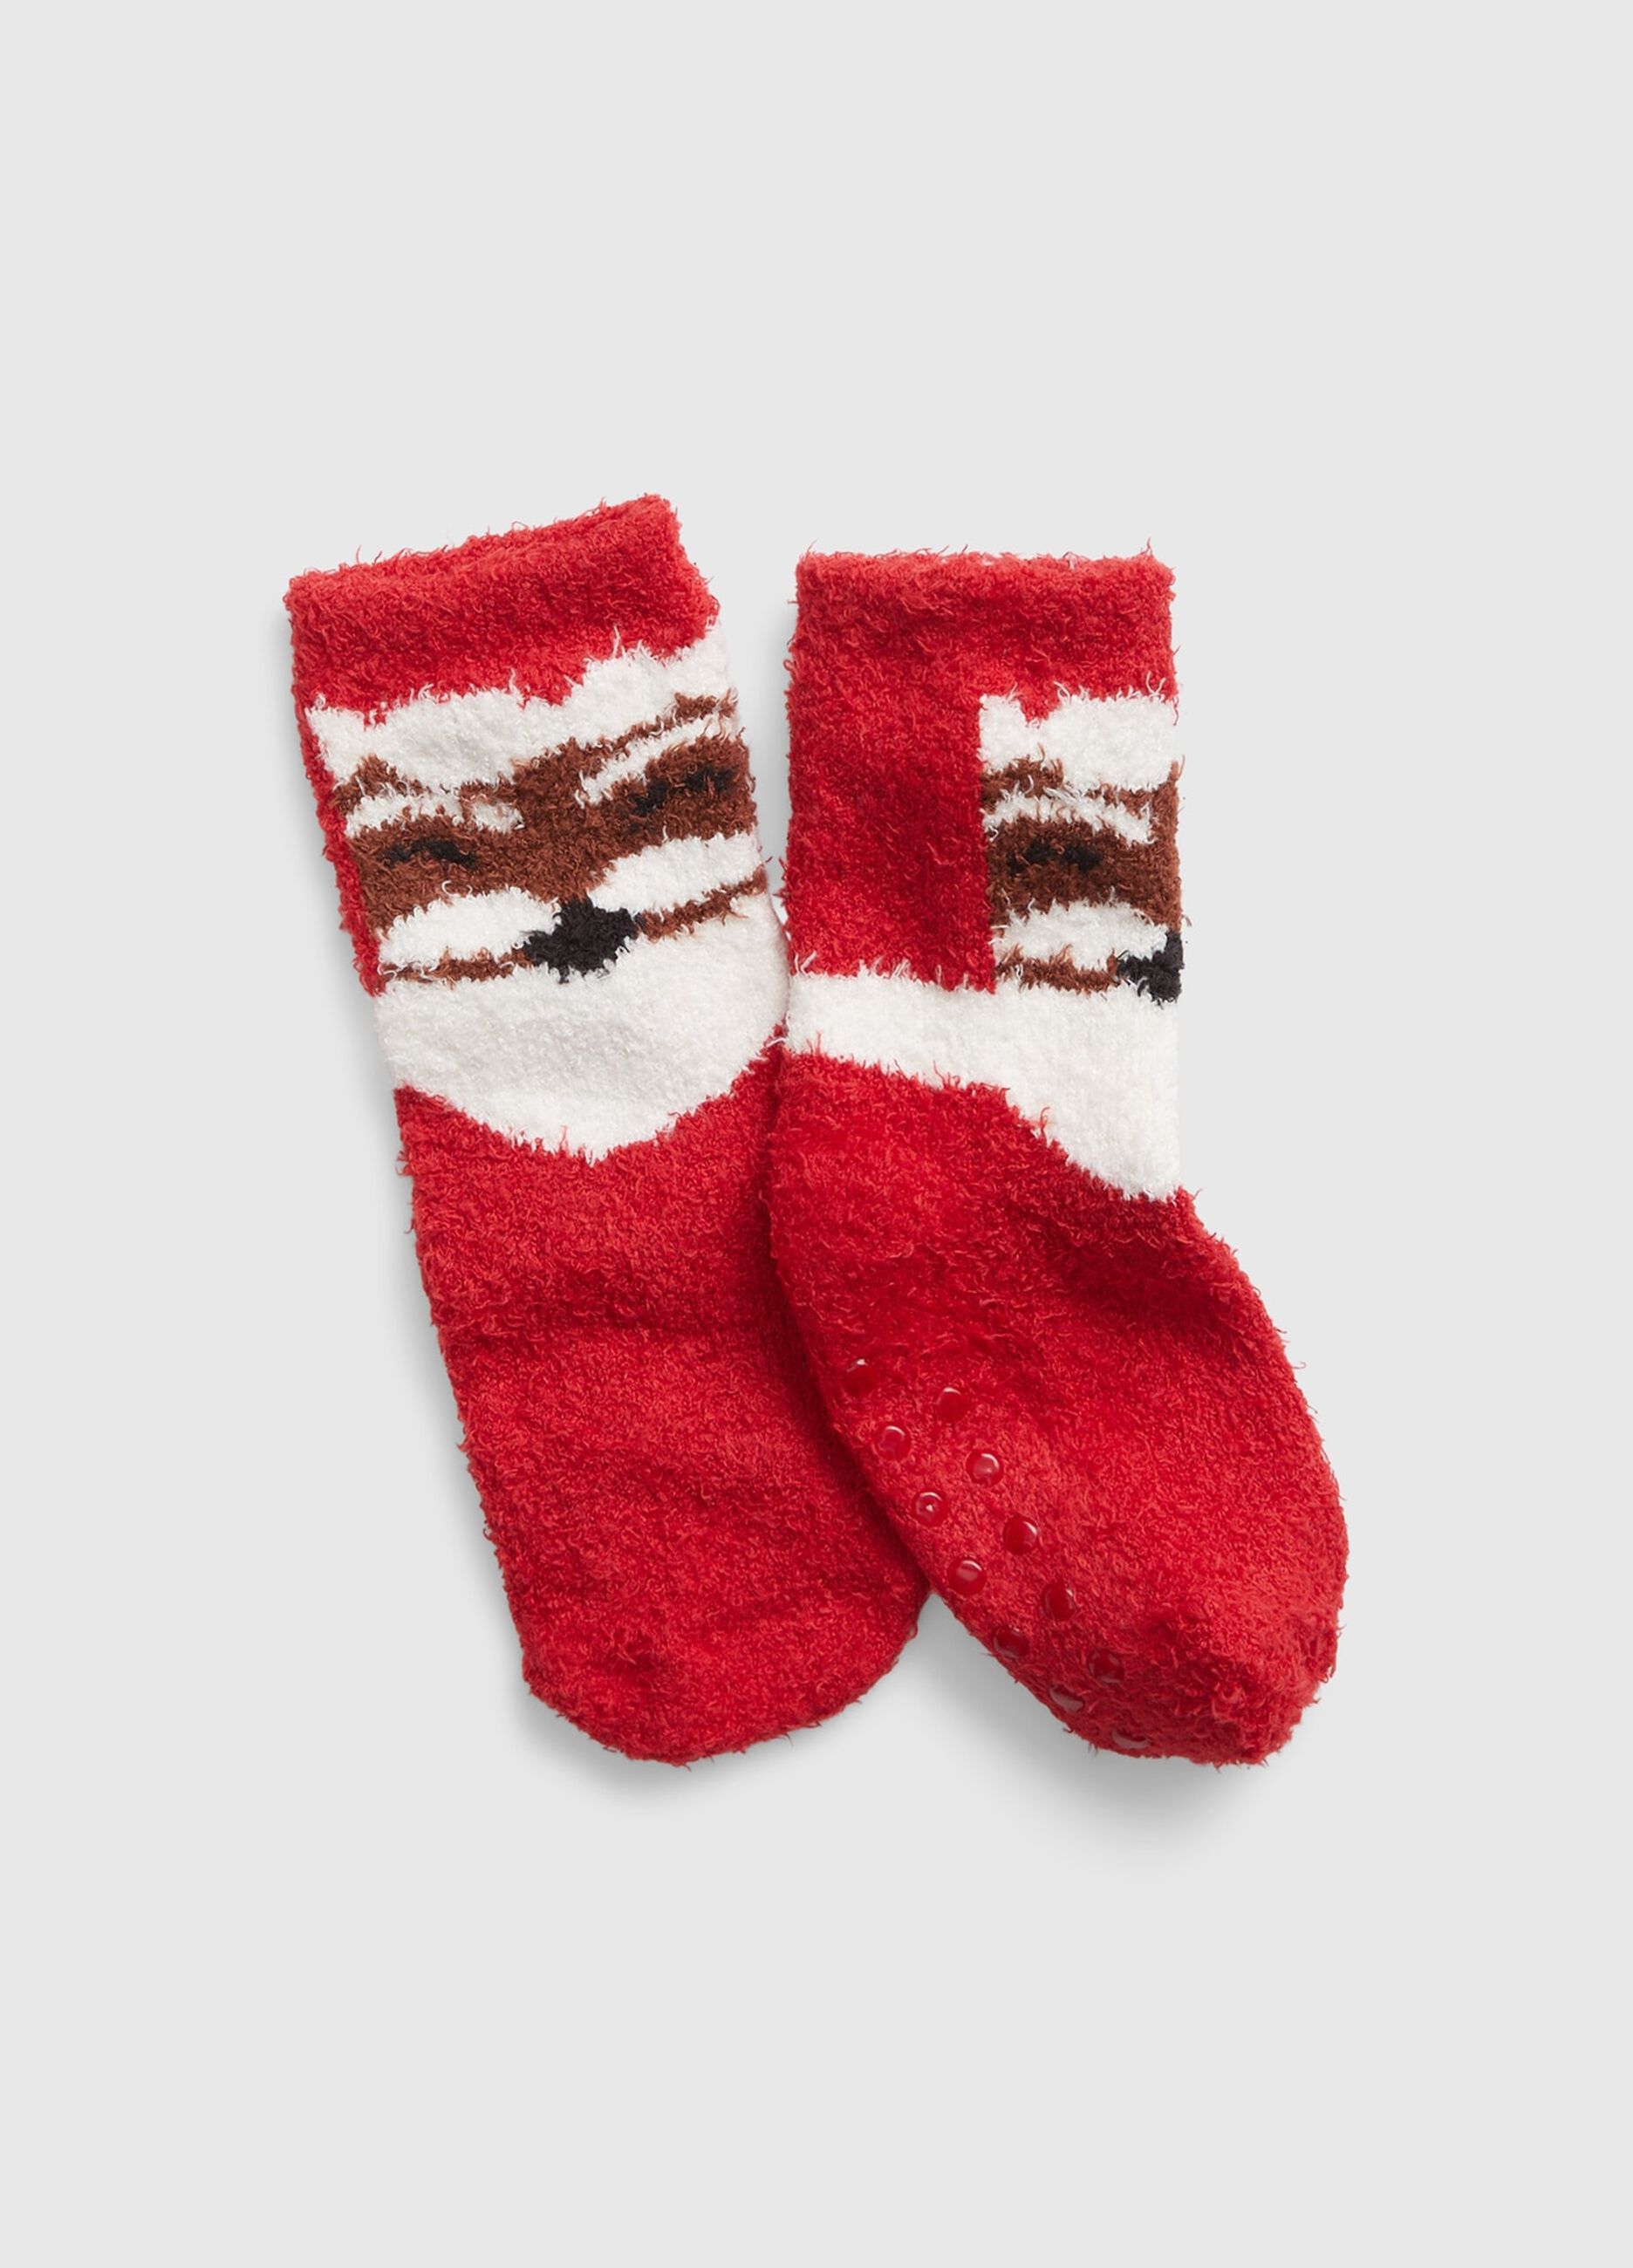 Slipper socks with Father Christmas design